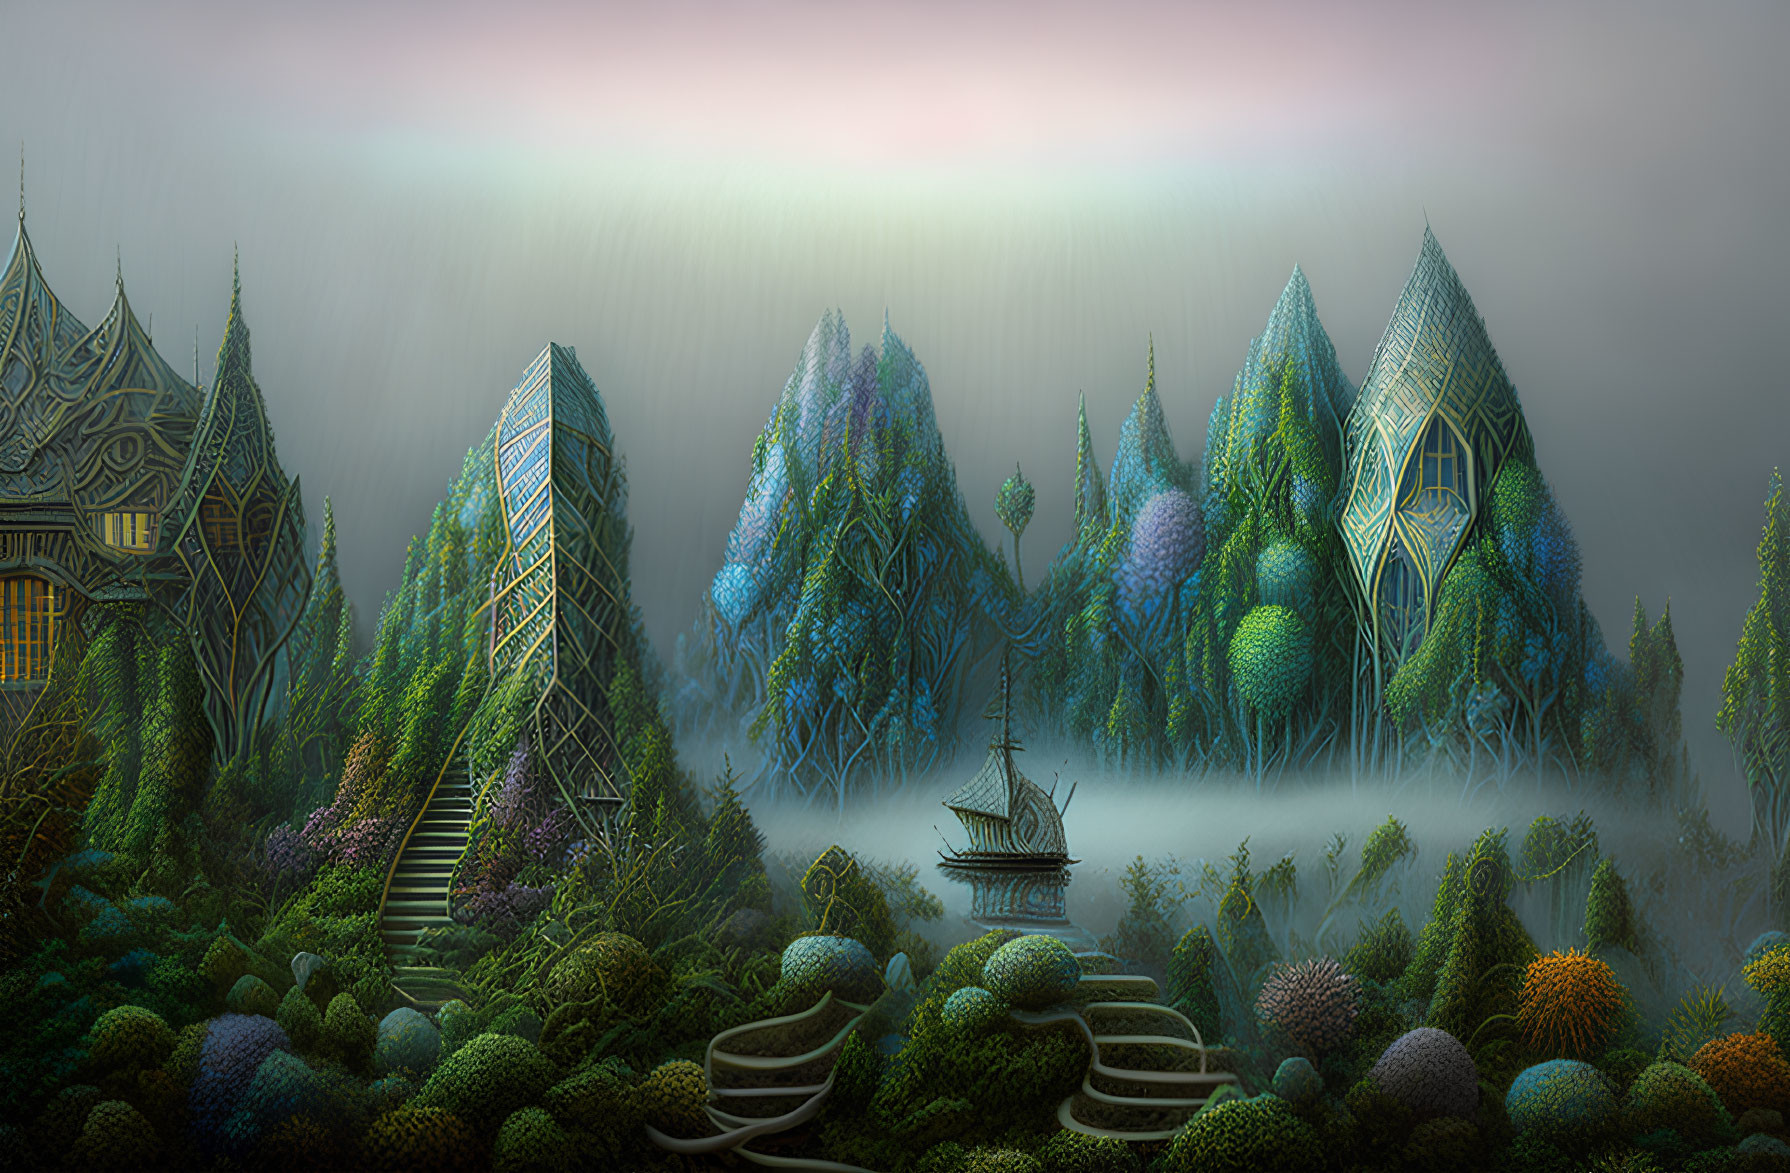 Ethereal forest scene with nature-inspired buildings and pagoda